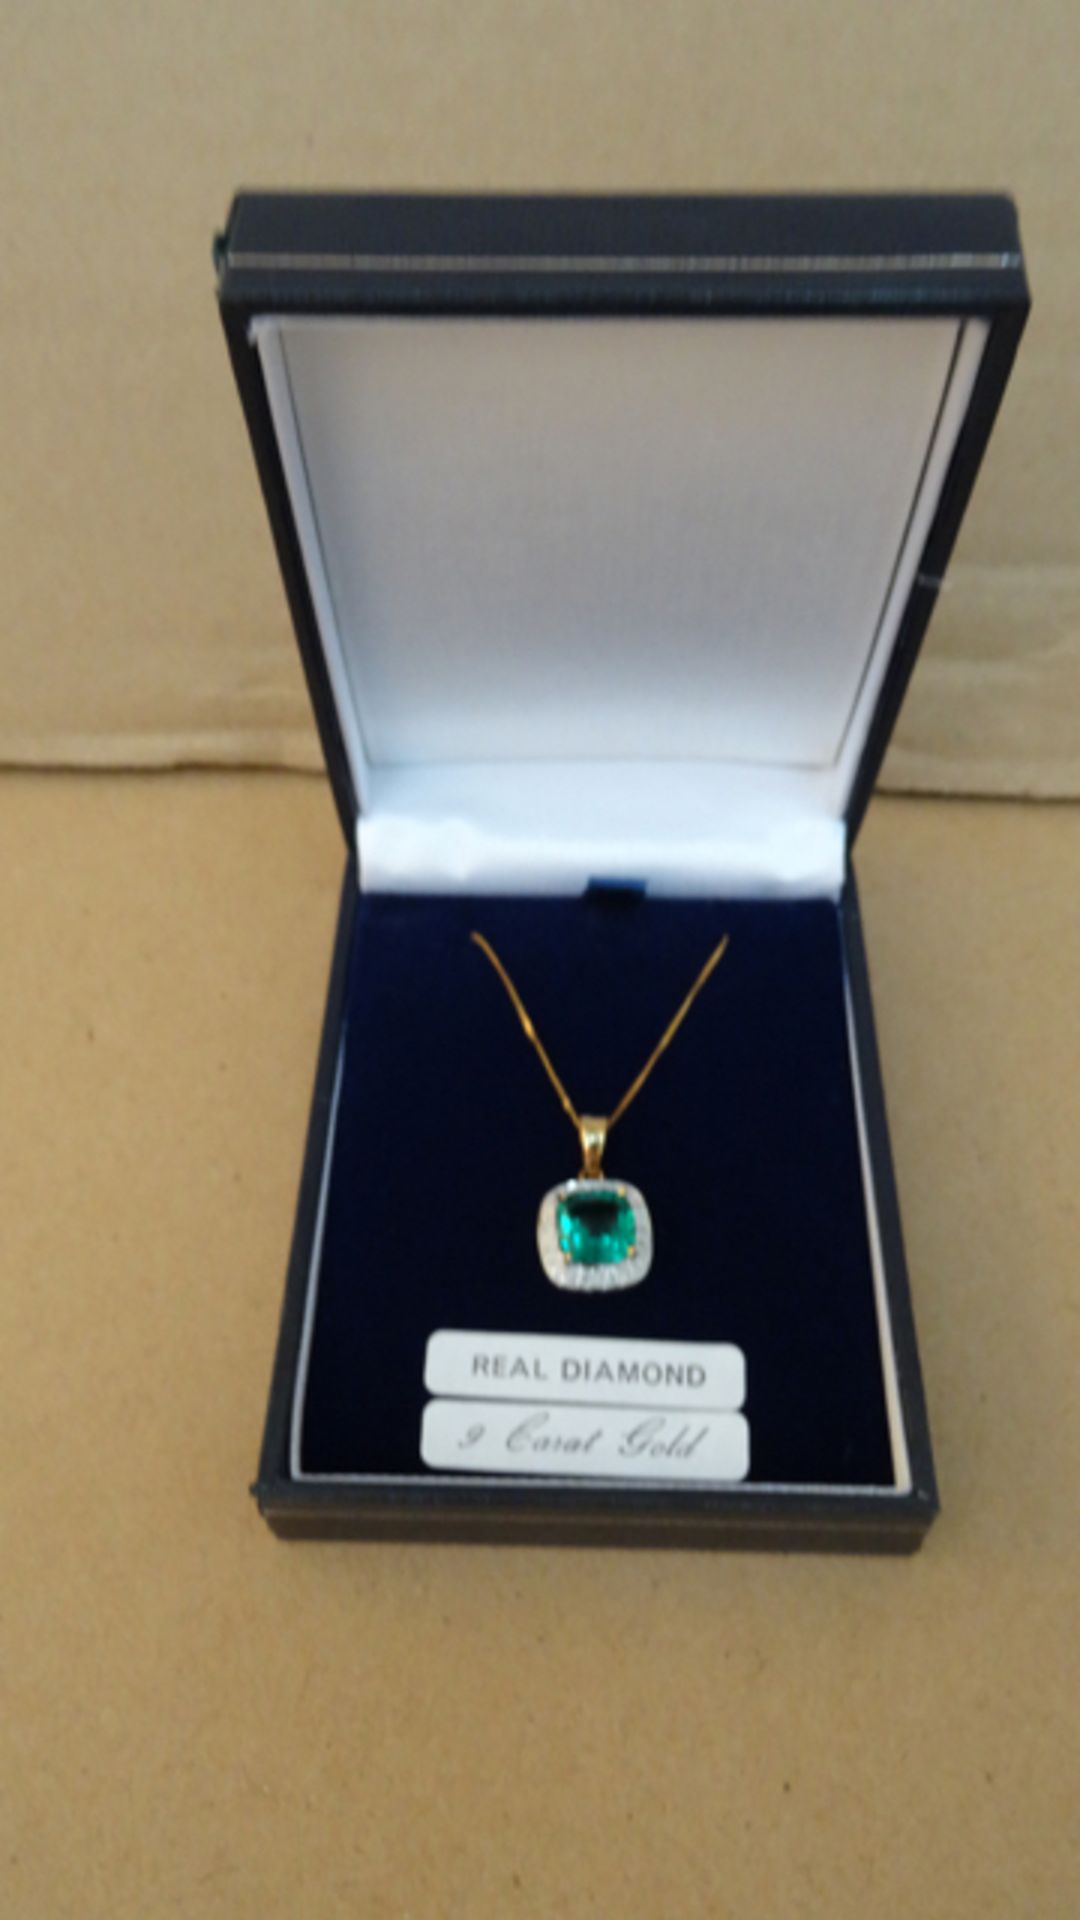 9ct Yellow Gold Chain with Emerald & Diamond Pendant. Beautiful piece, treat your loved one. - Image 2 of 3